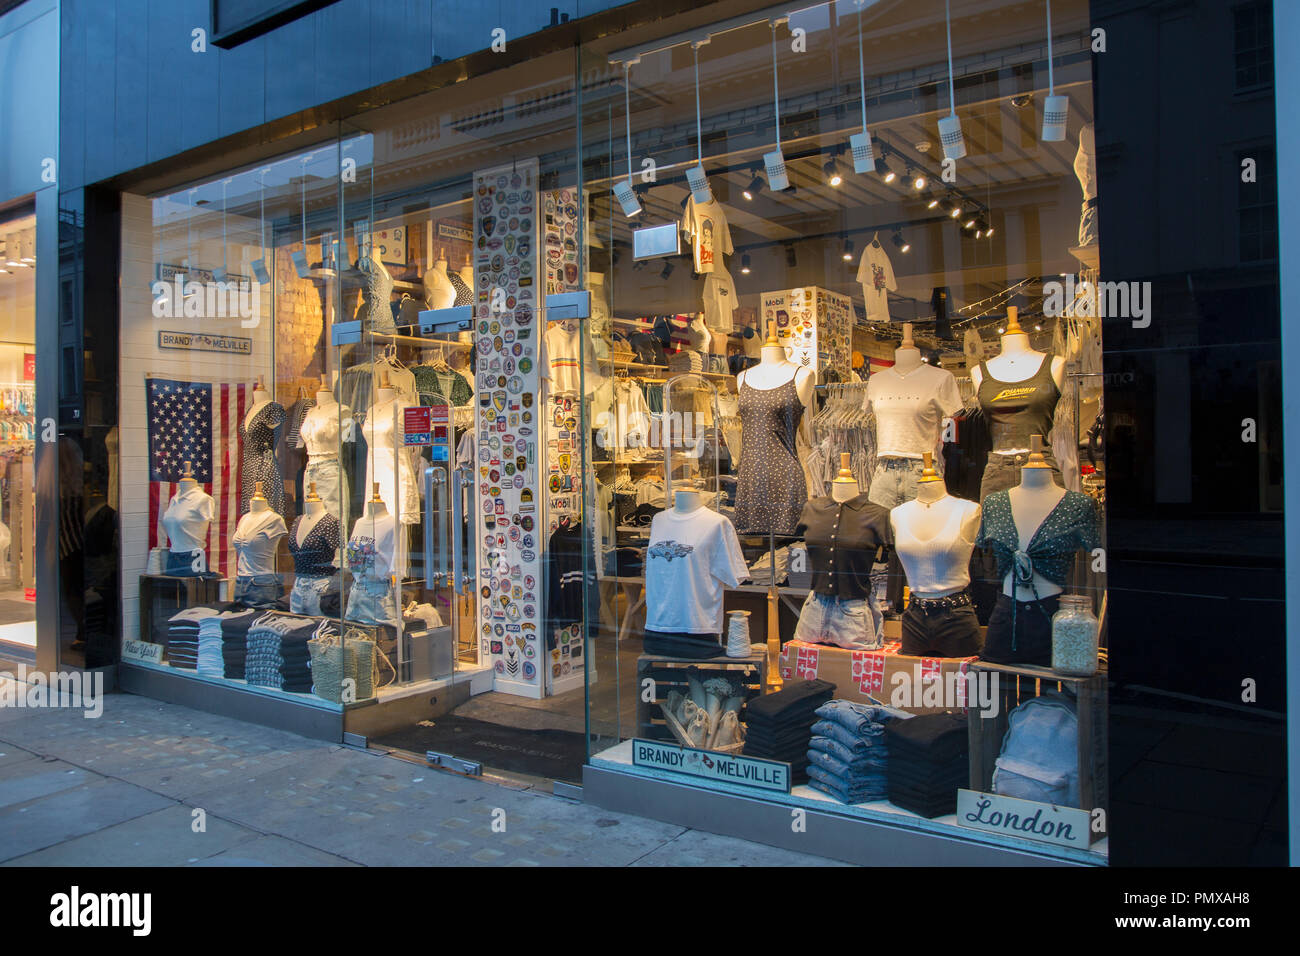 Brandy And Melville Clothes Shop Kings Road Chelsea London England Uk Stock Photo Alamy